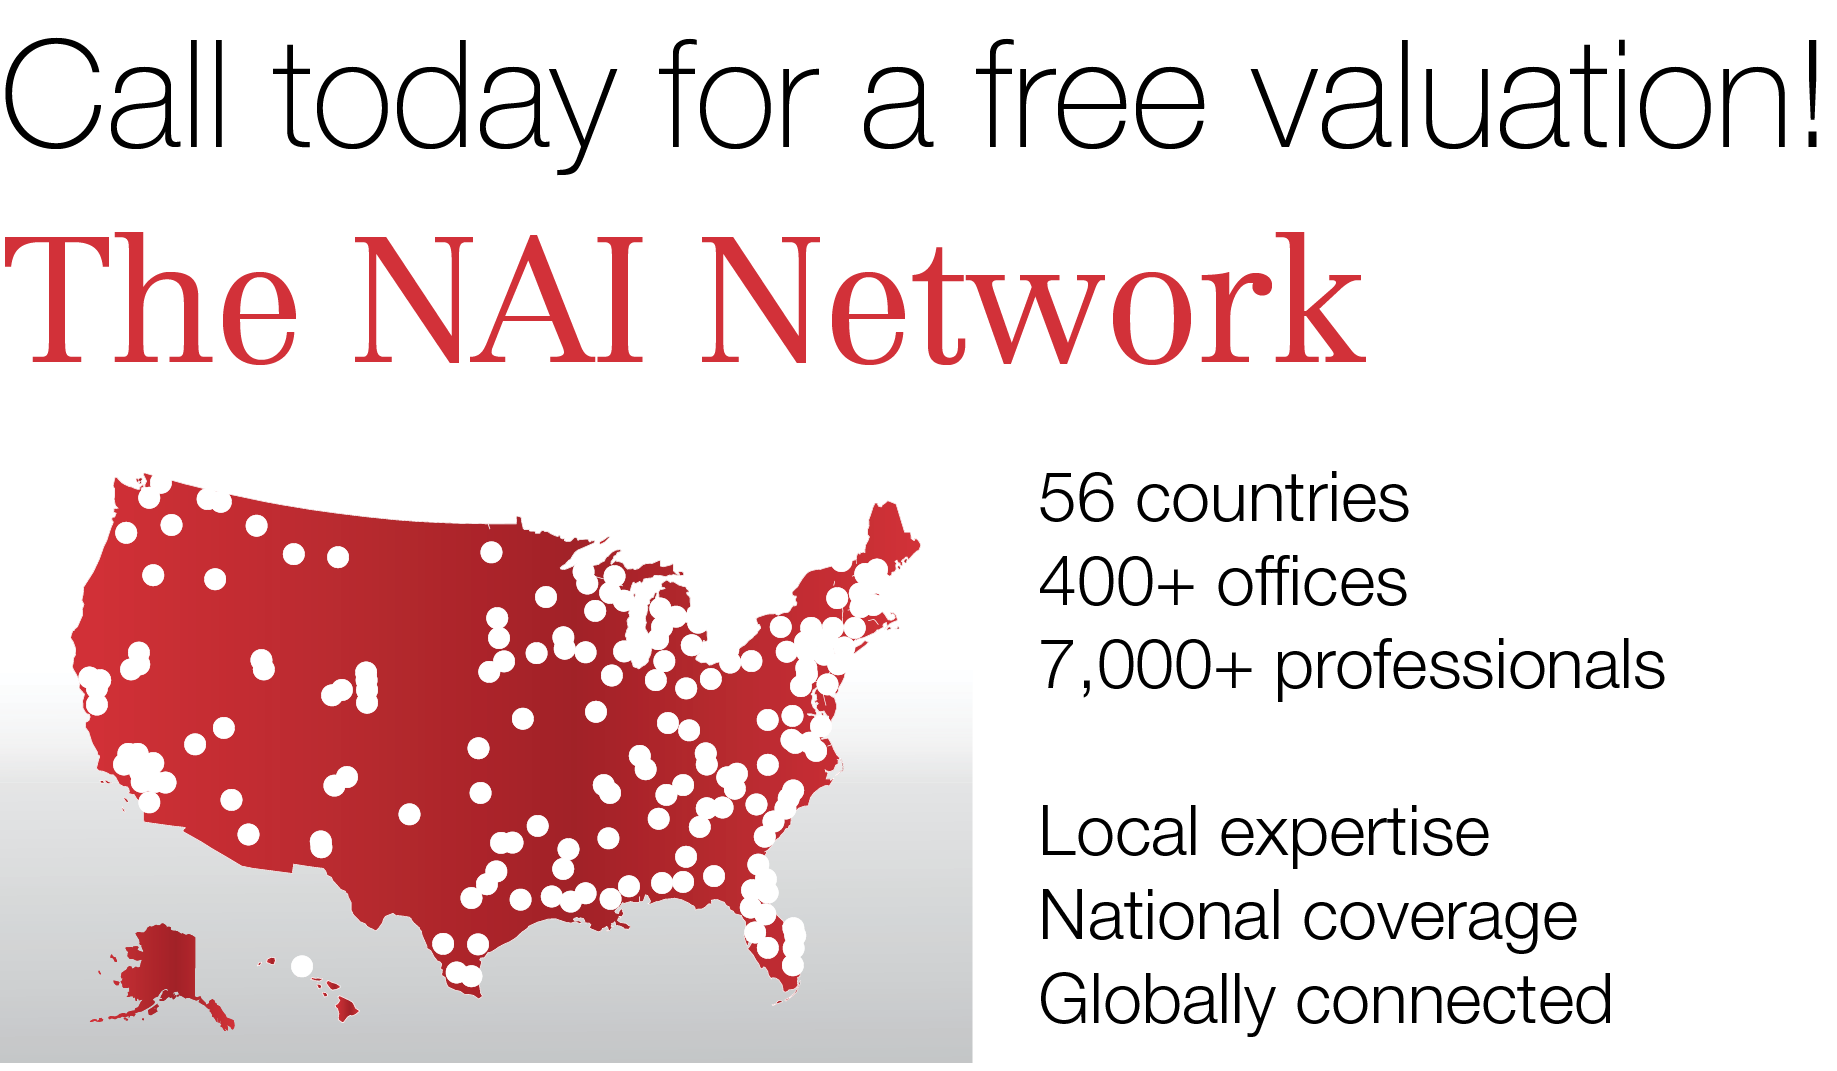 Call today for a free valuation The Nai Network